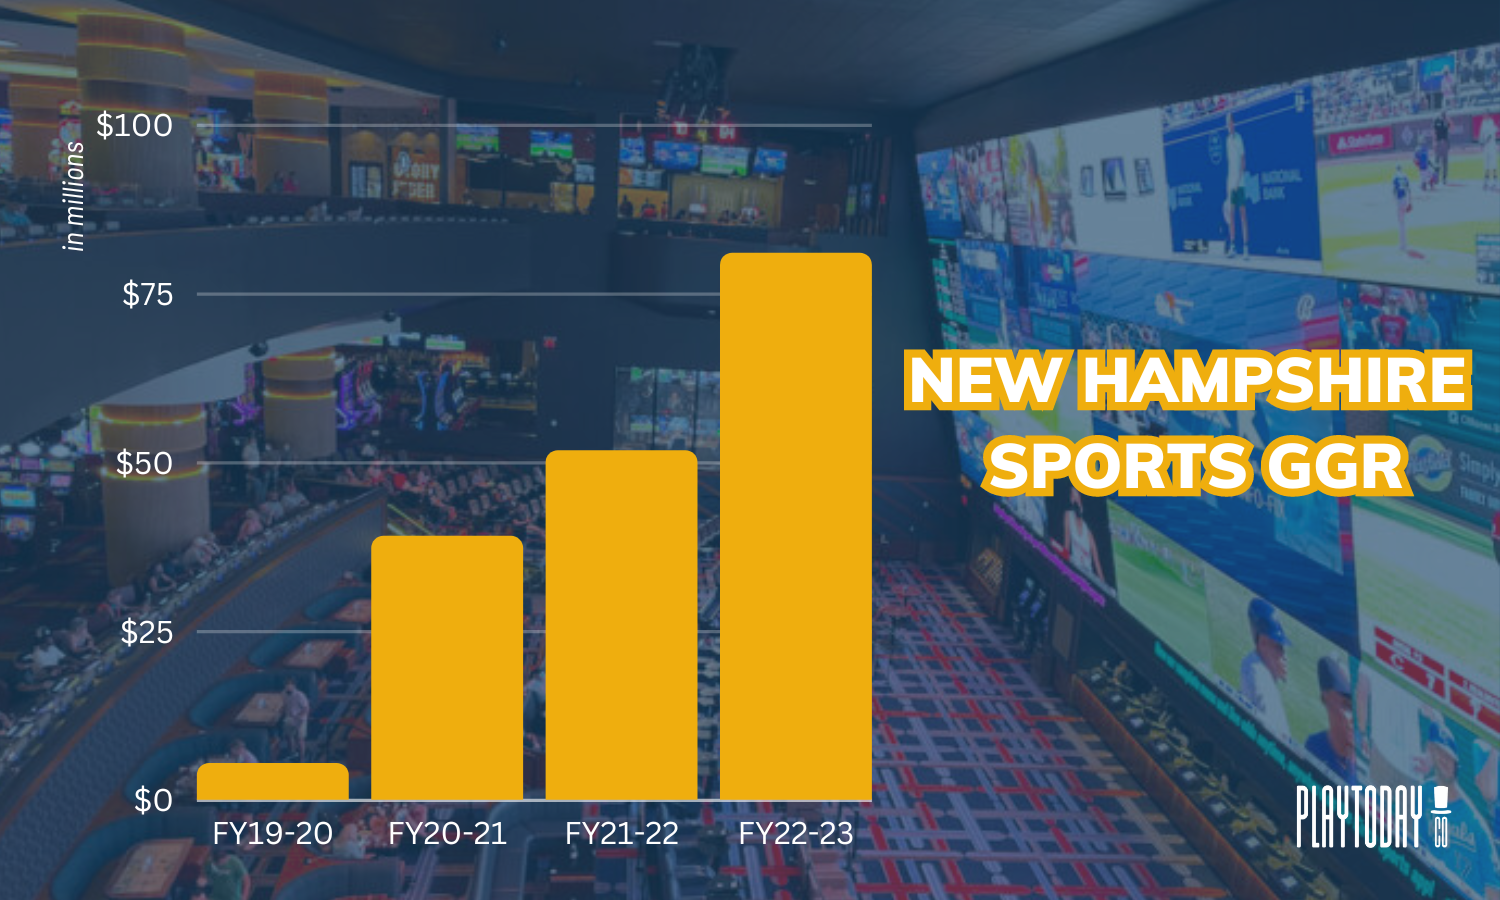 Bar Graph of New Hampshire’s Sports Bet GGR